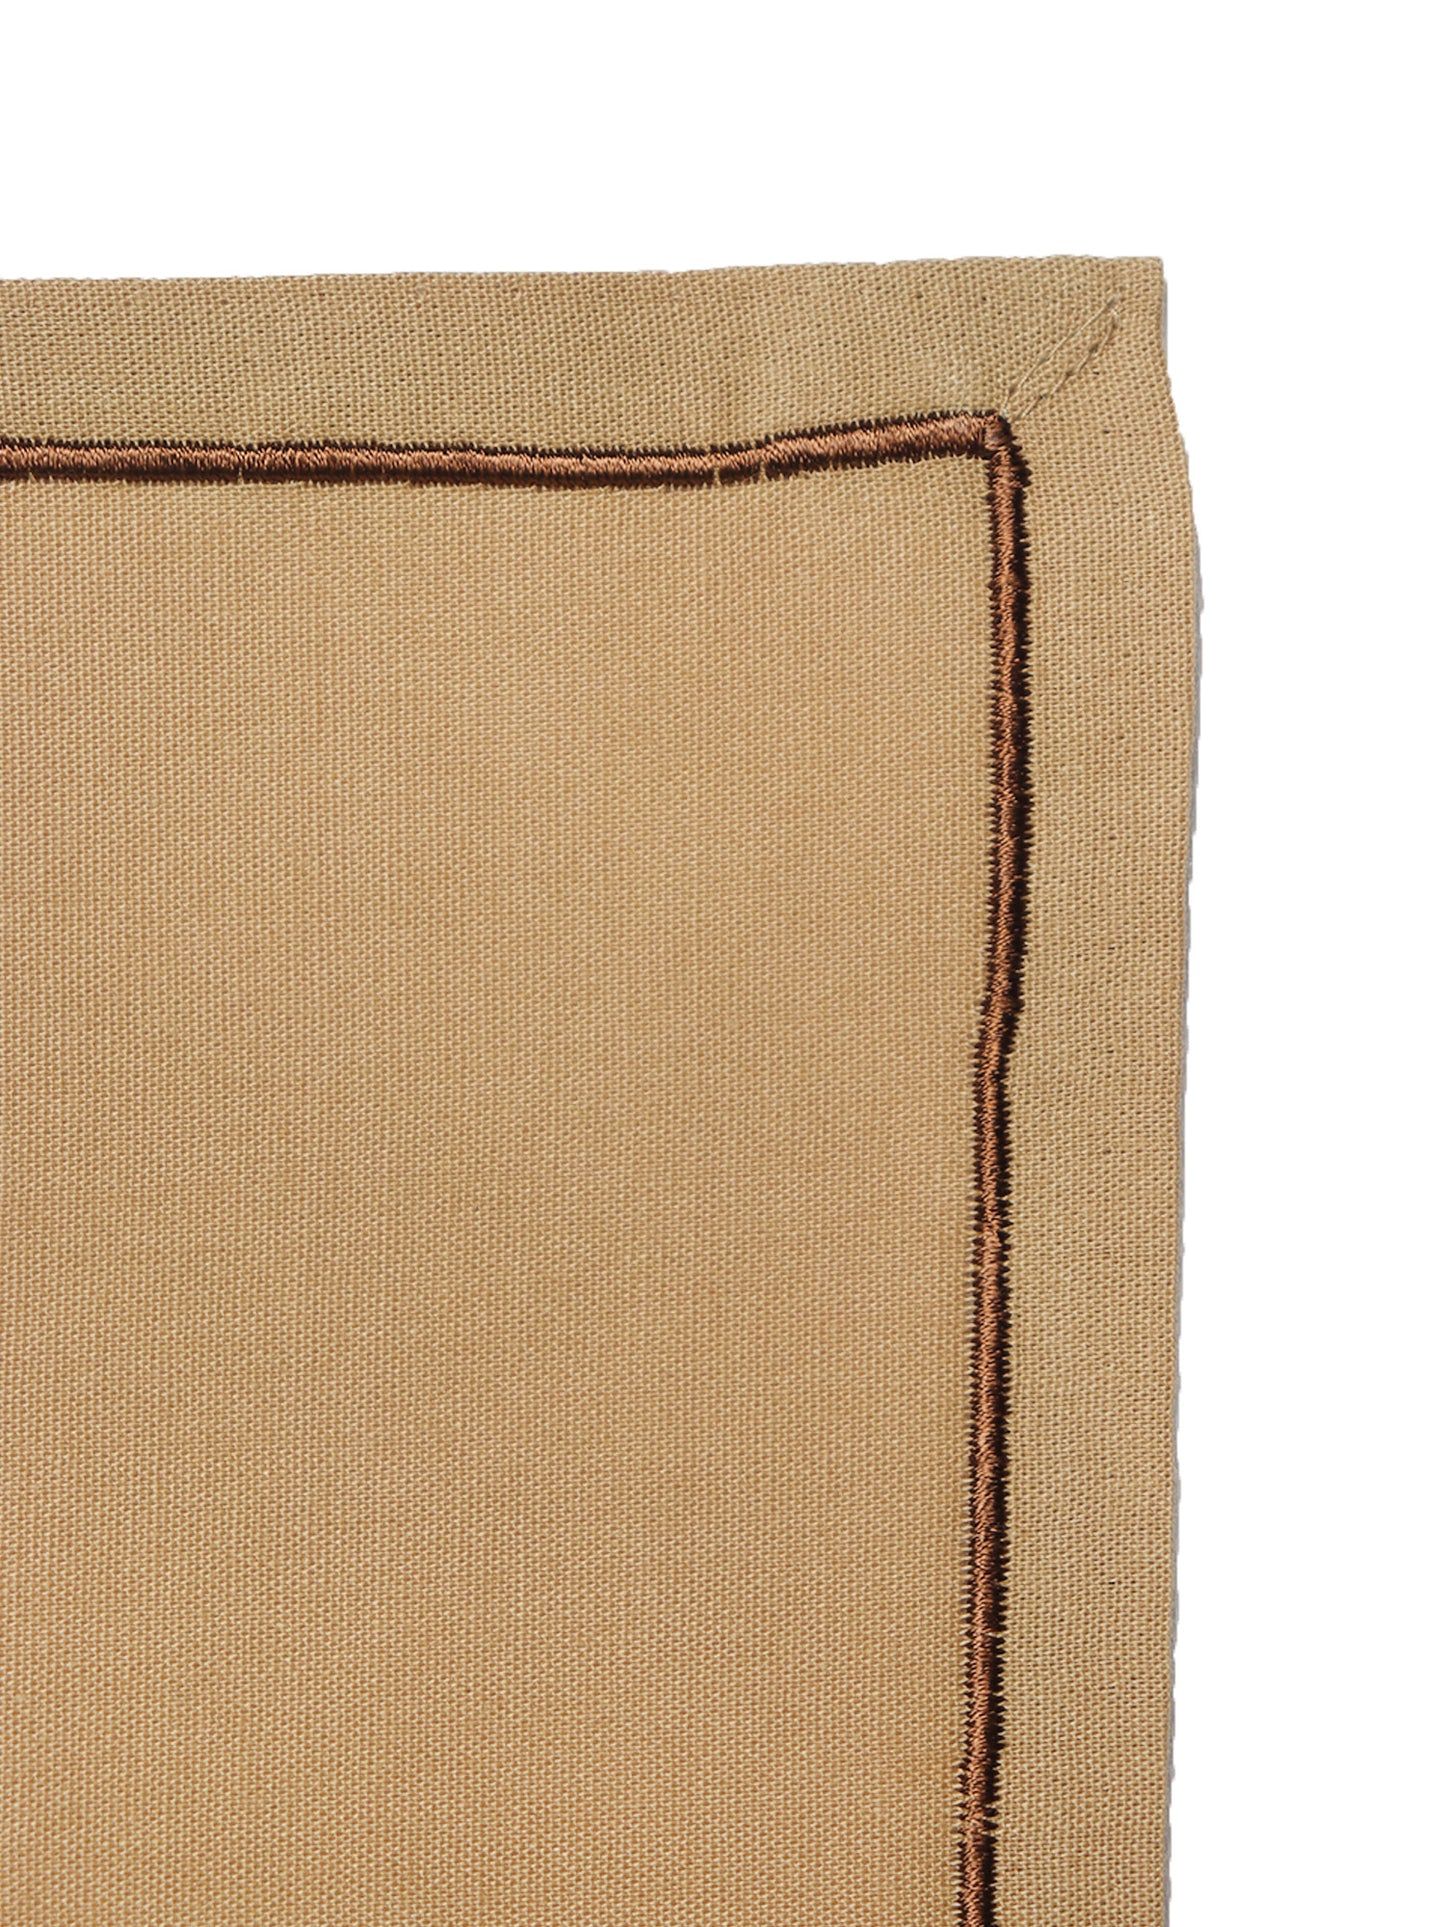 closeup of embroidered set of 6 dinner napkins in beige color - 16x16 inch